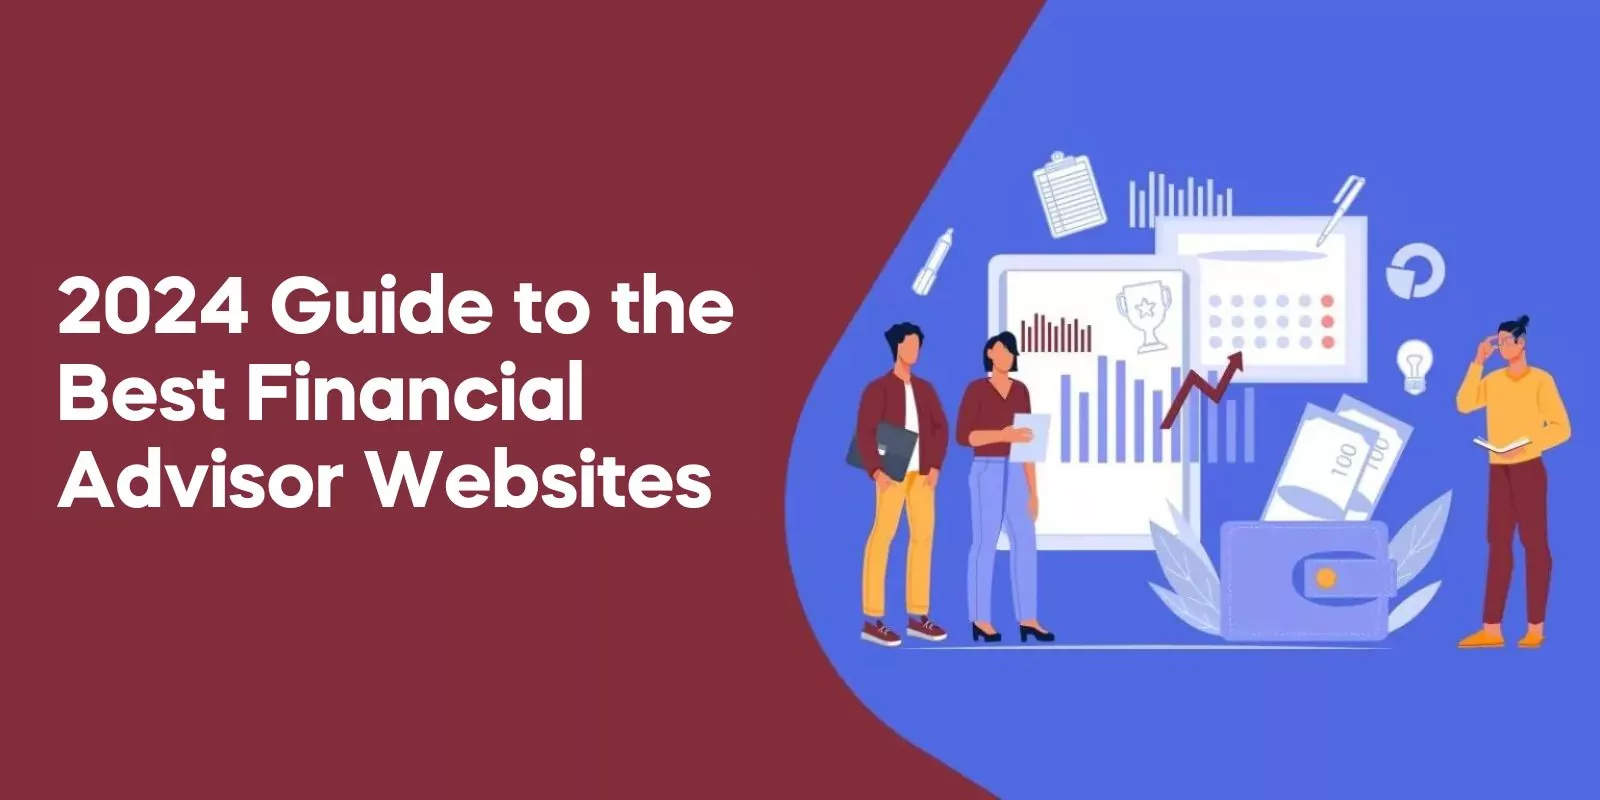 2024 Guide to the Best Financial Advisor Websites